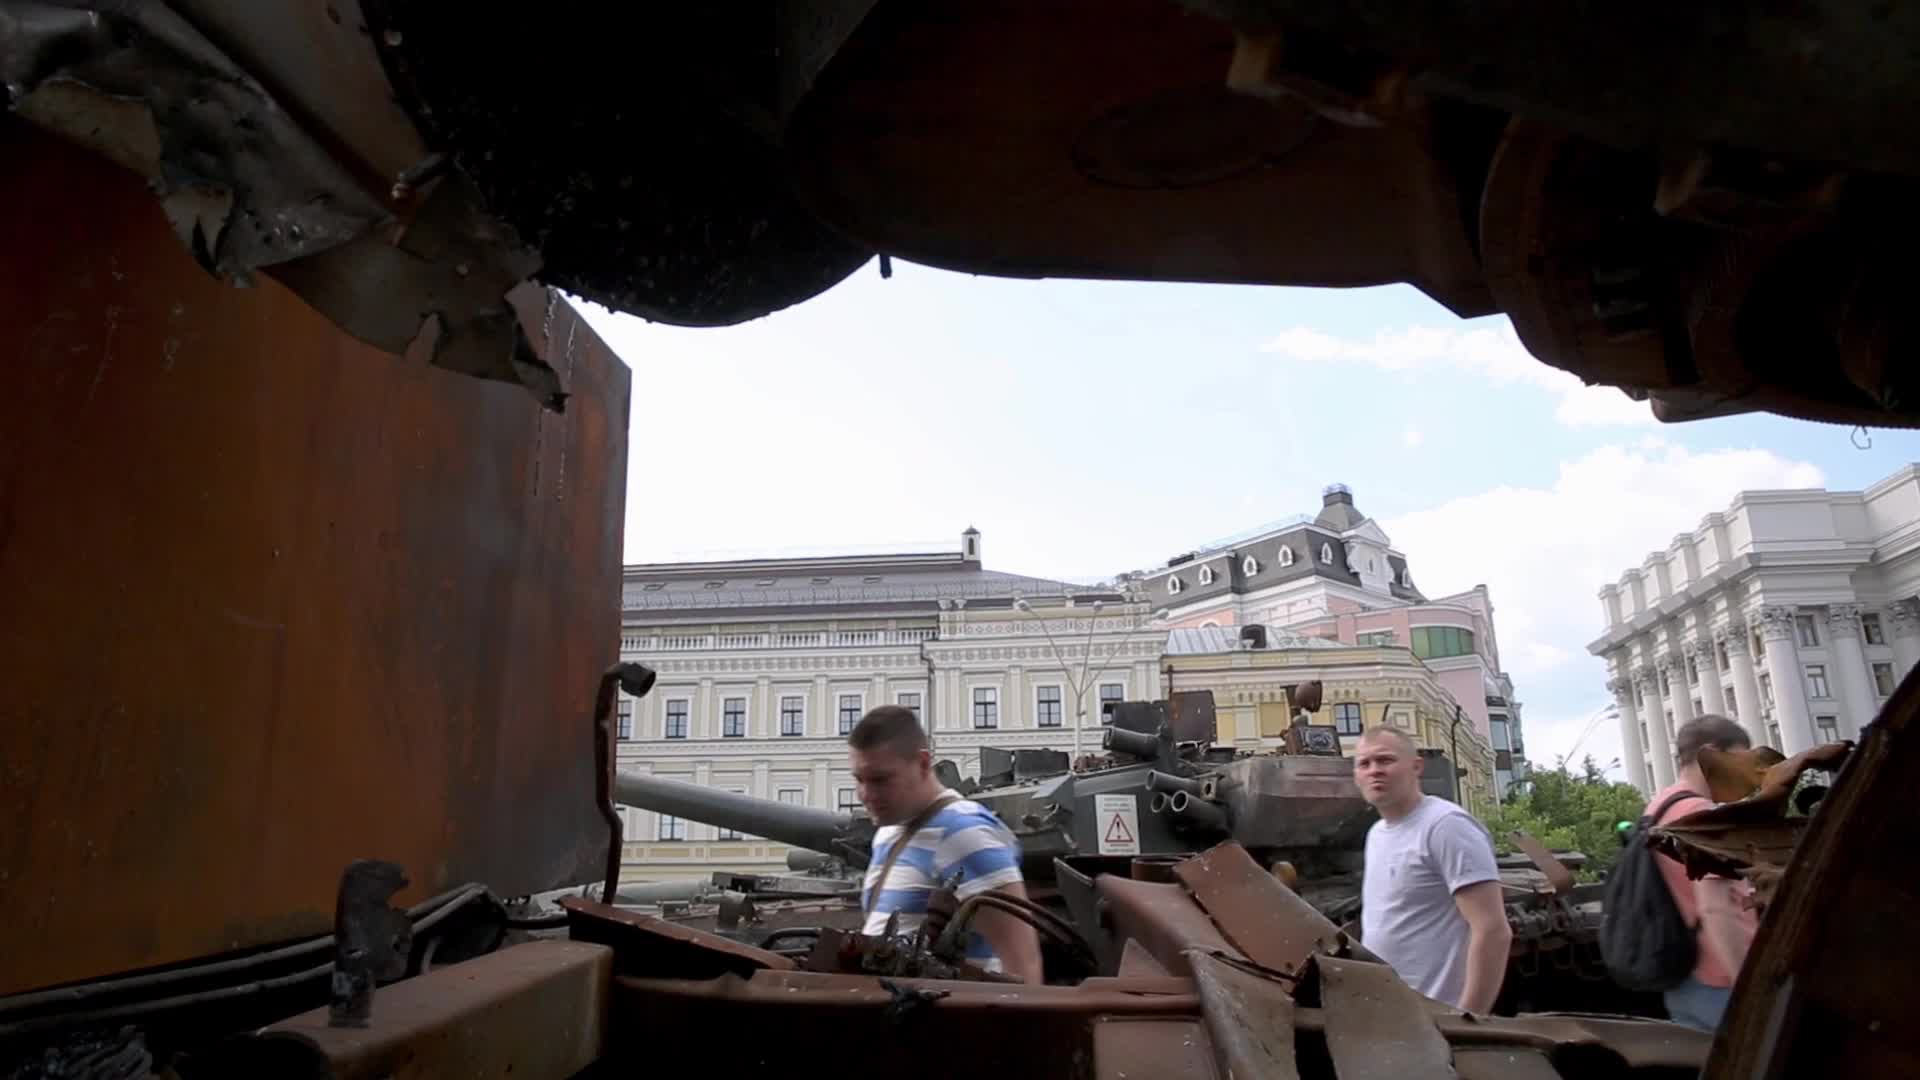 An Exhibition of Burned Russian Army Vehicles in Kyiv